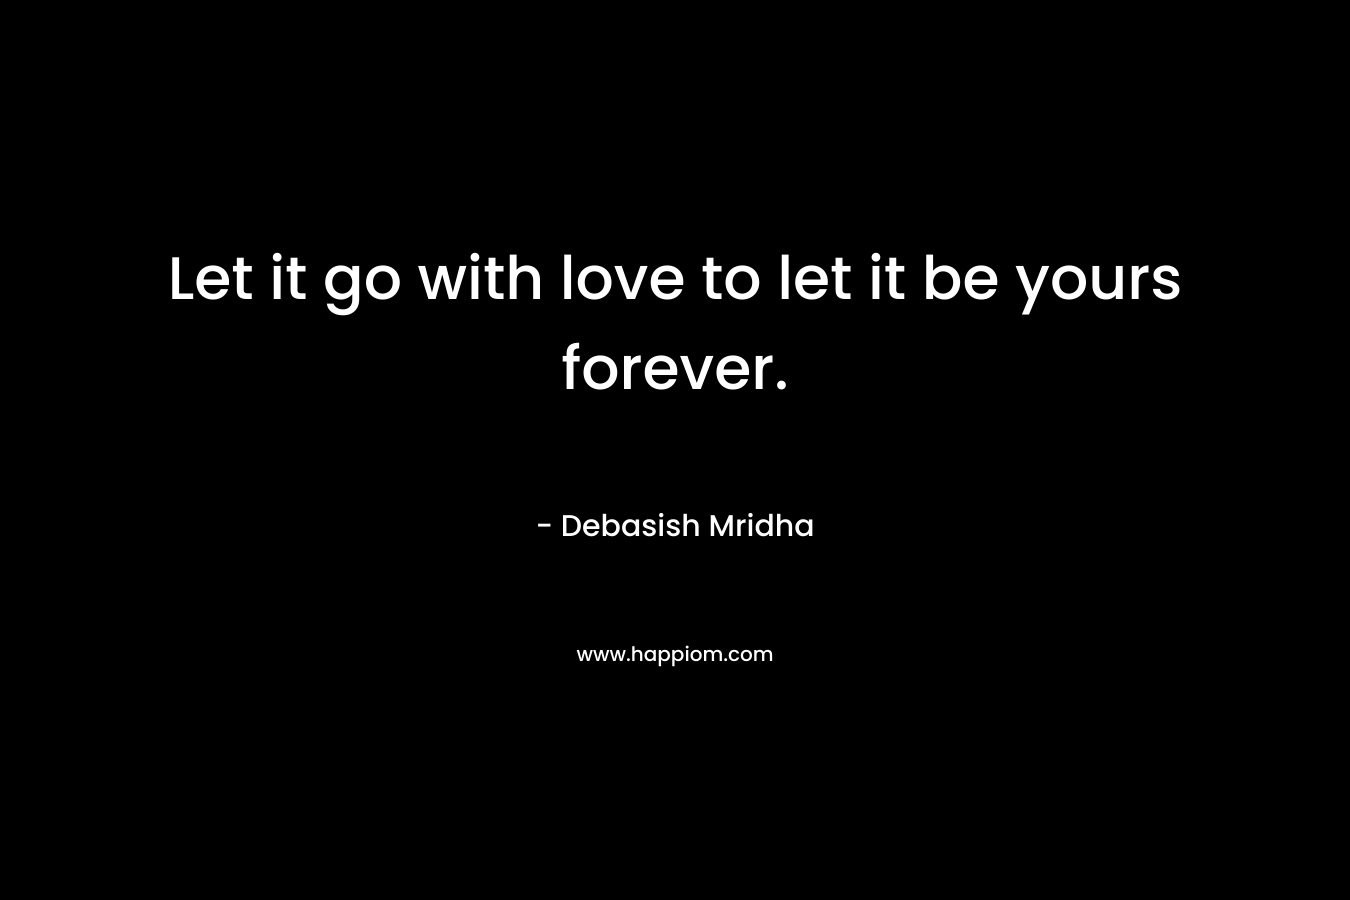 Let it go with love to let it be yours forever.